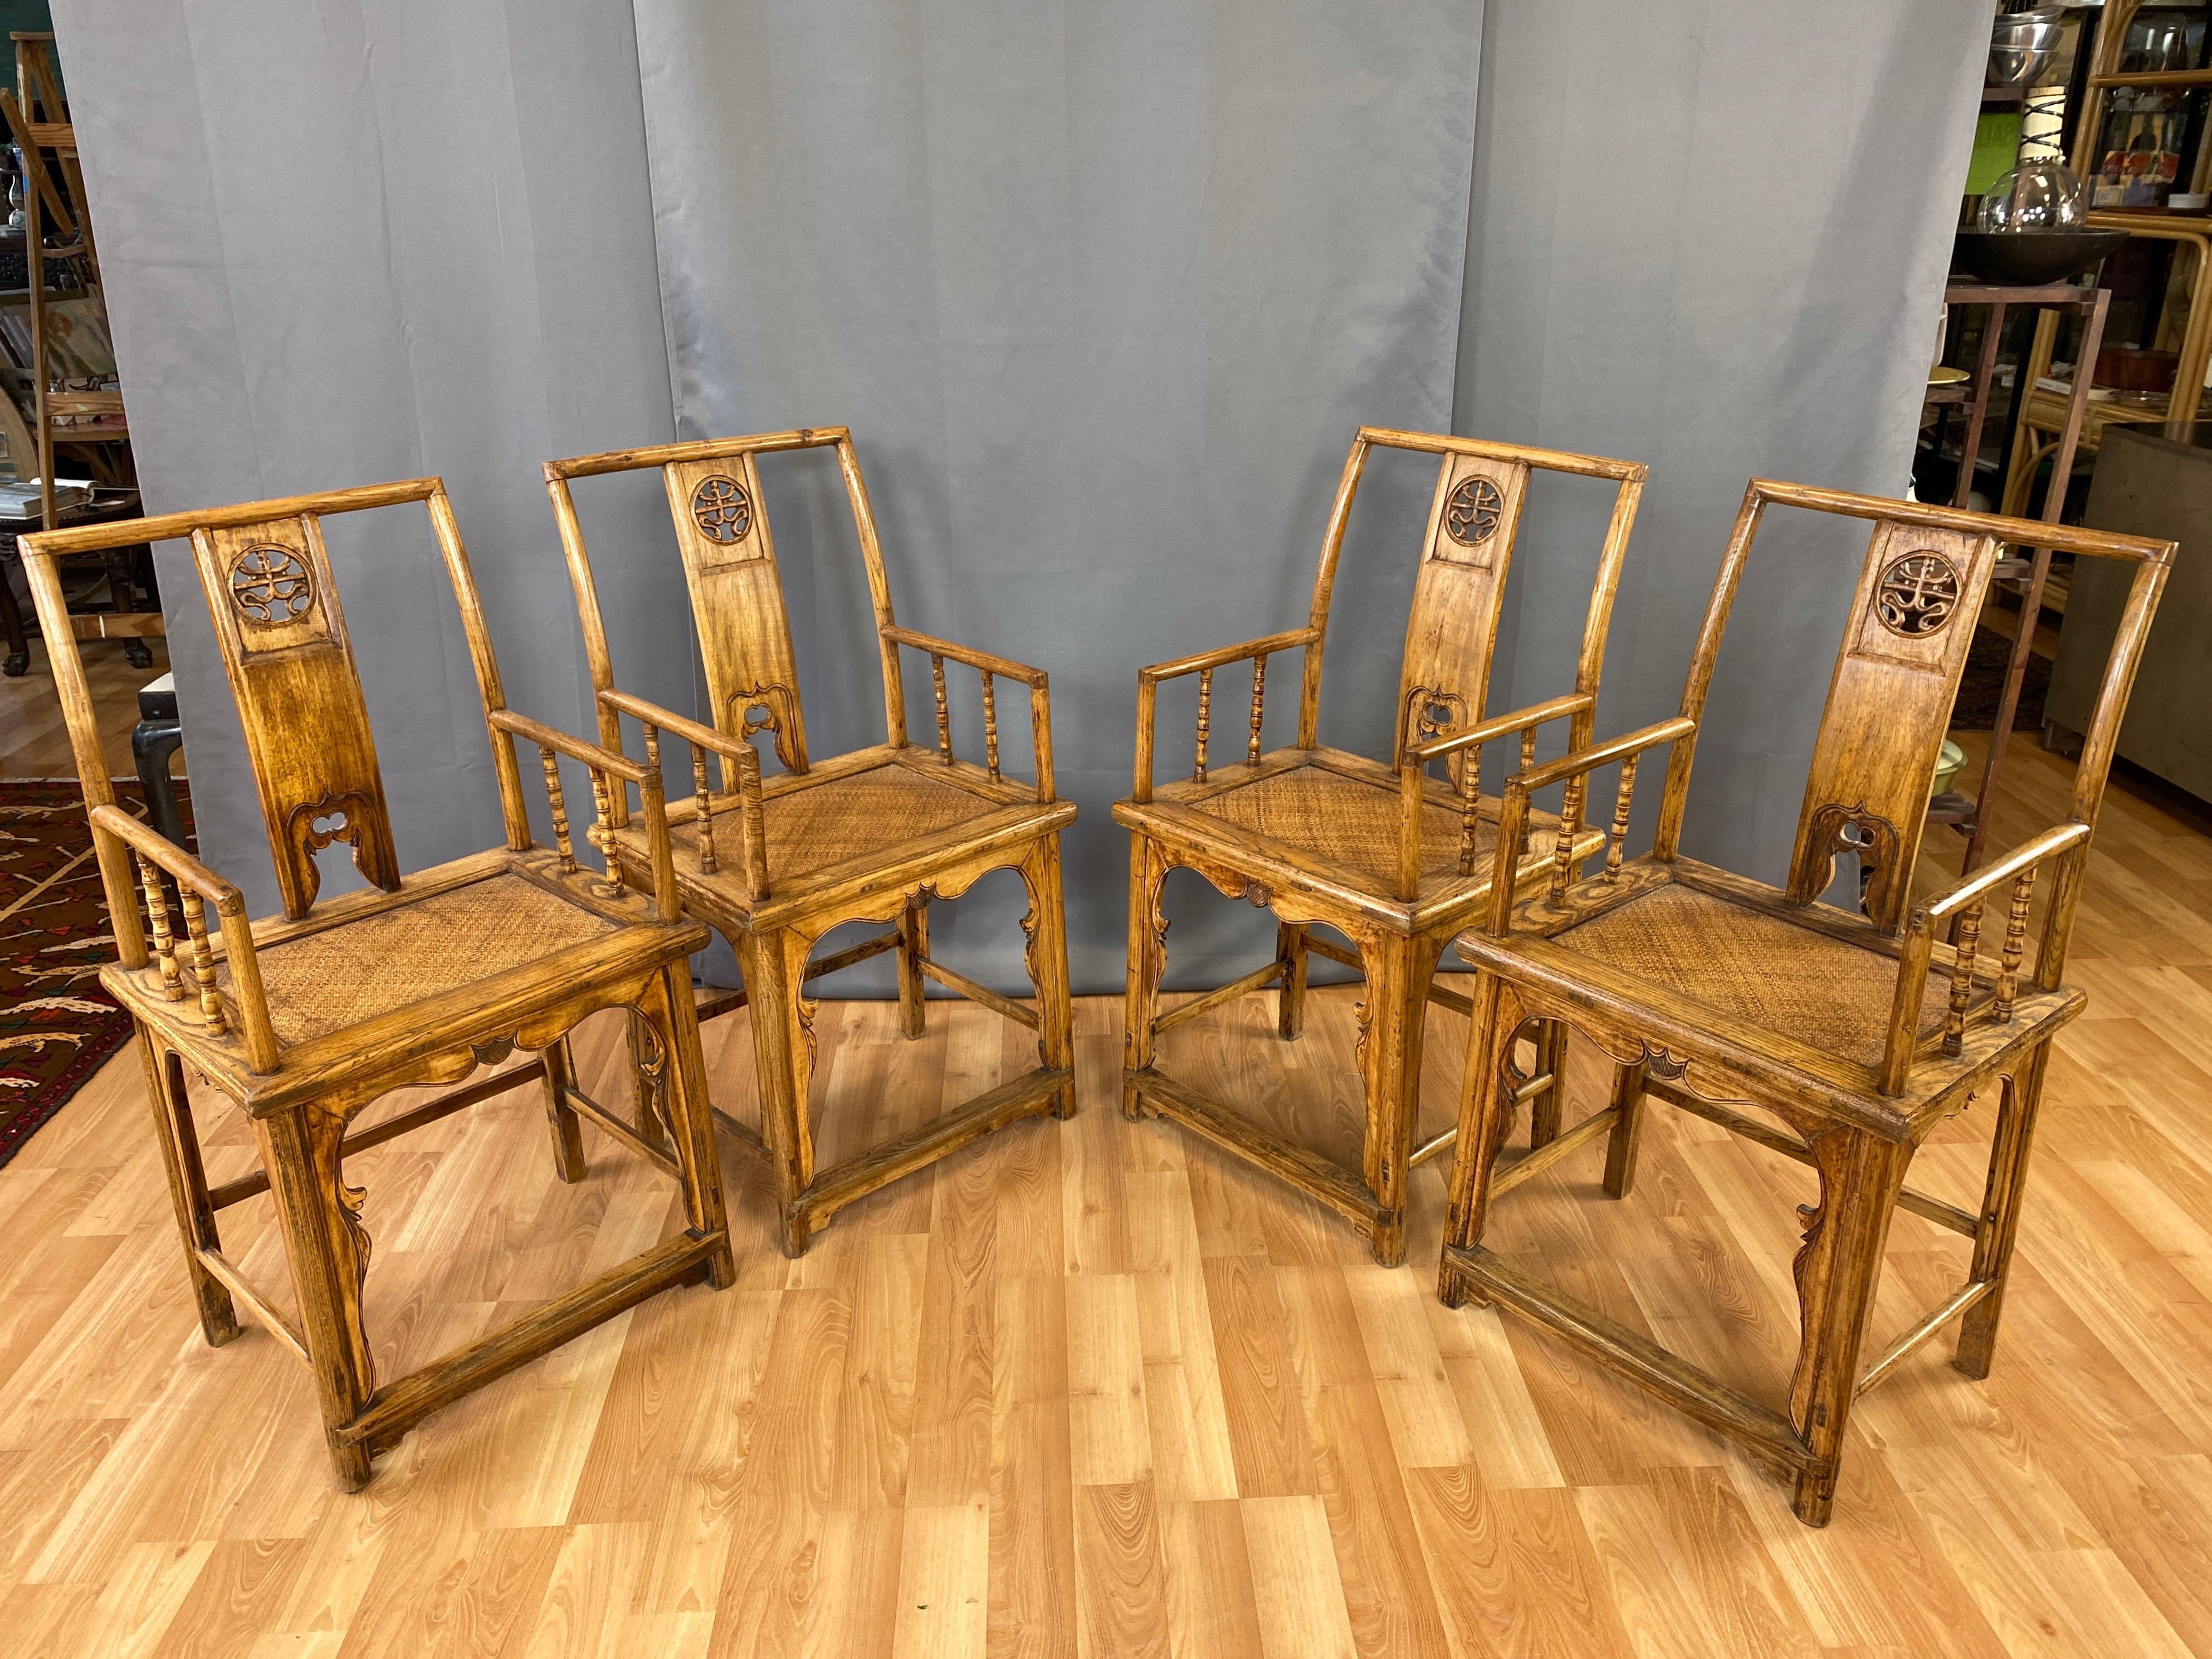 A fine set of four circa 1900 Qing dynasty Southern official’s hat armchairs in elm.

Very handsome and well crafted solid elm wood frame distinguished by open carved back splat medallion, elegantly sculpted skirting, and bamboo-motif turned wood